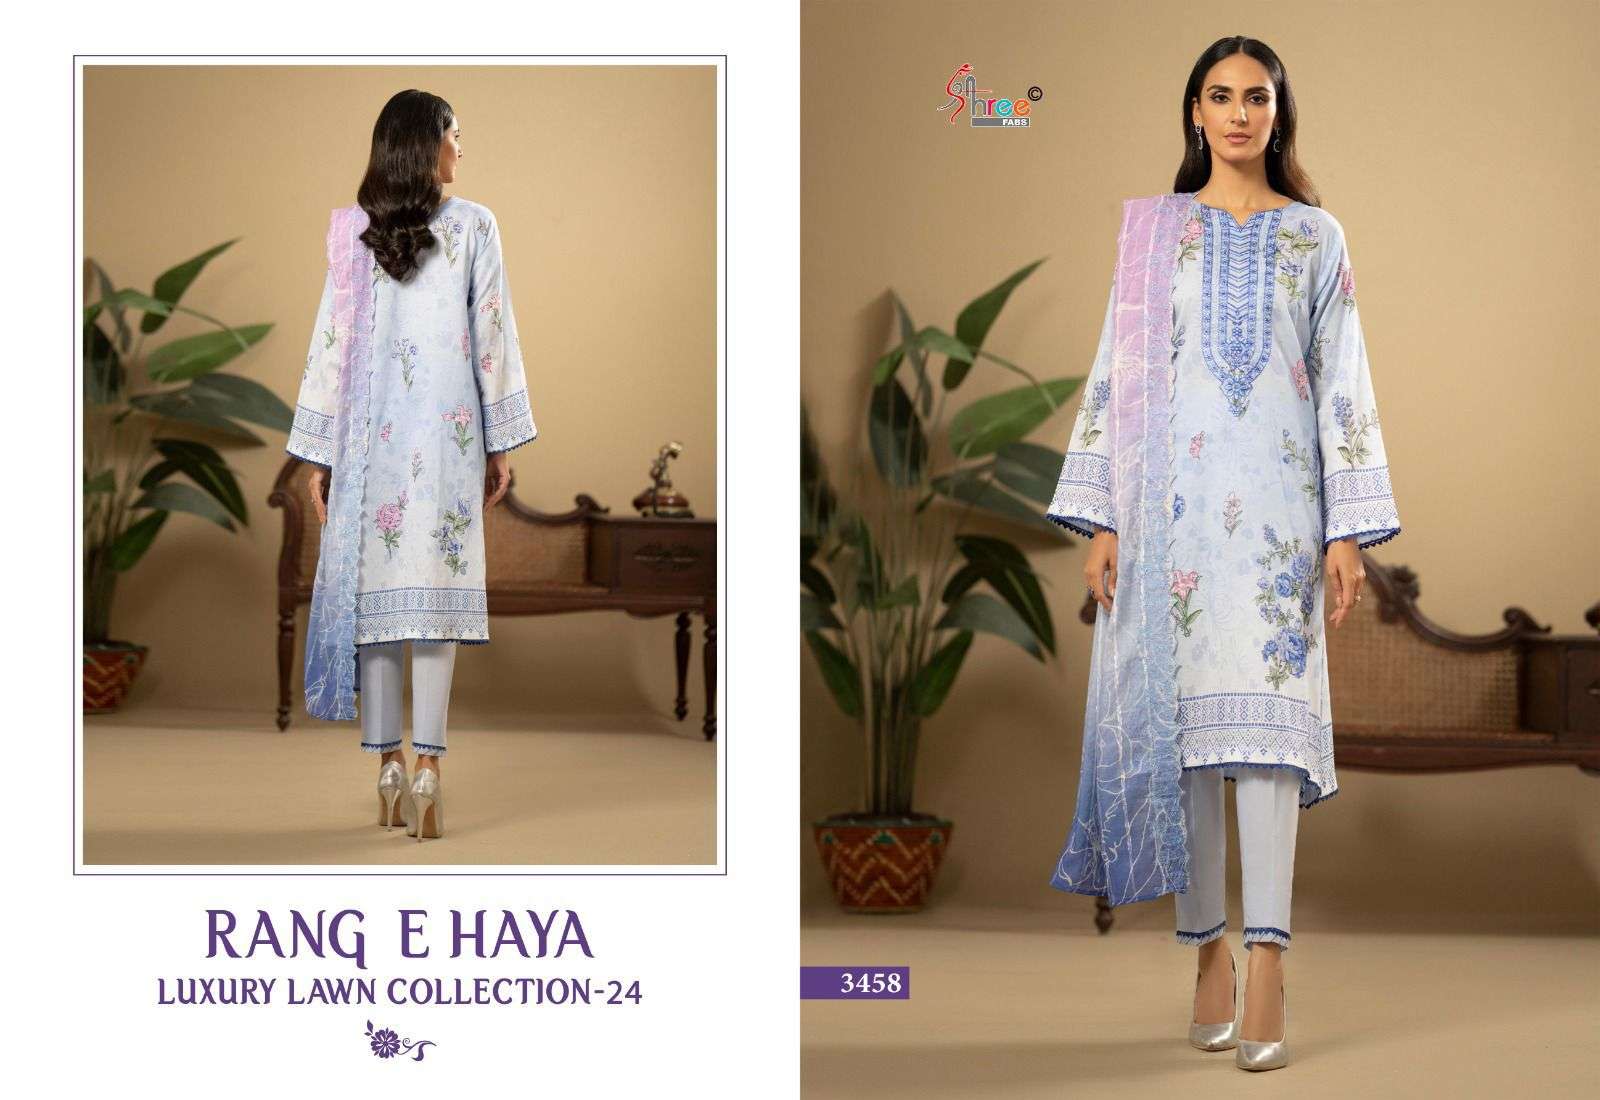 shree fabs rang e haya luxury lawn collection vol 01 cotton exclusive print with siffion dupatta catalog